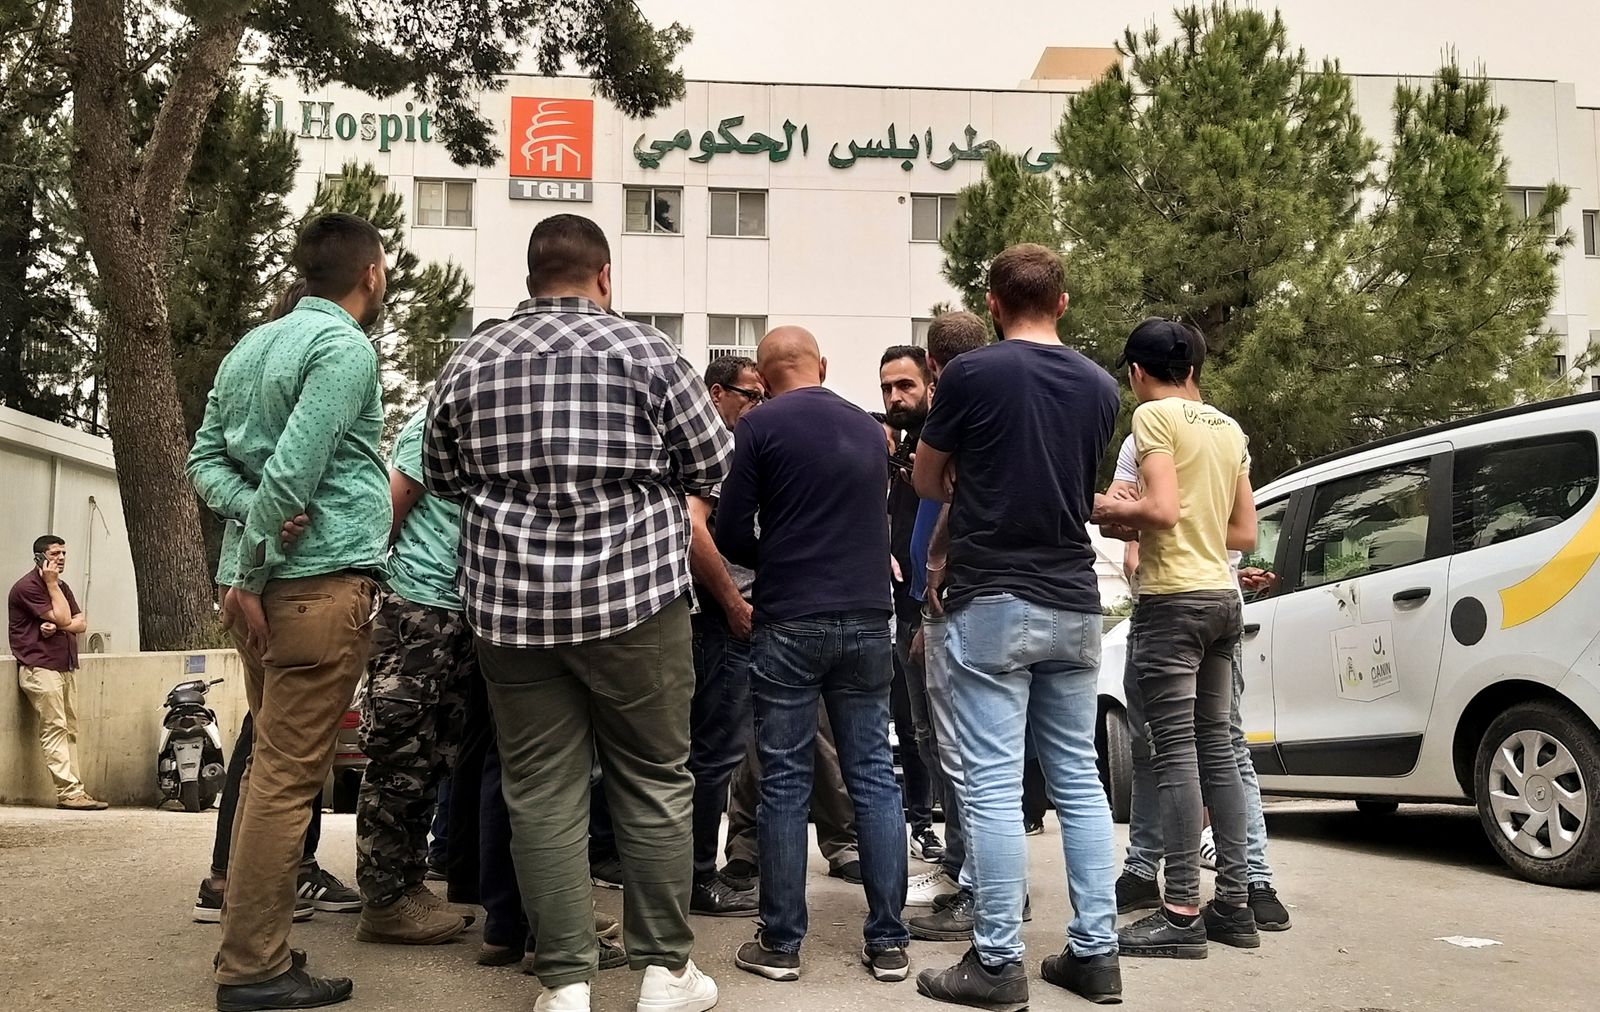 Relatives of people who died when a boat capsized off the Lebanese coast of Tripoli overnight, gather outisde a governmental hospital in Tripoli - REUTERS